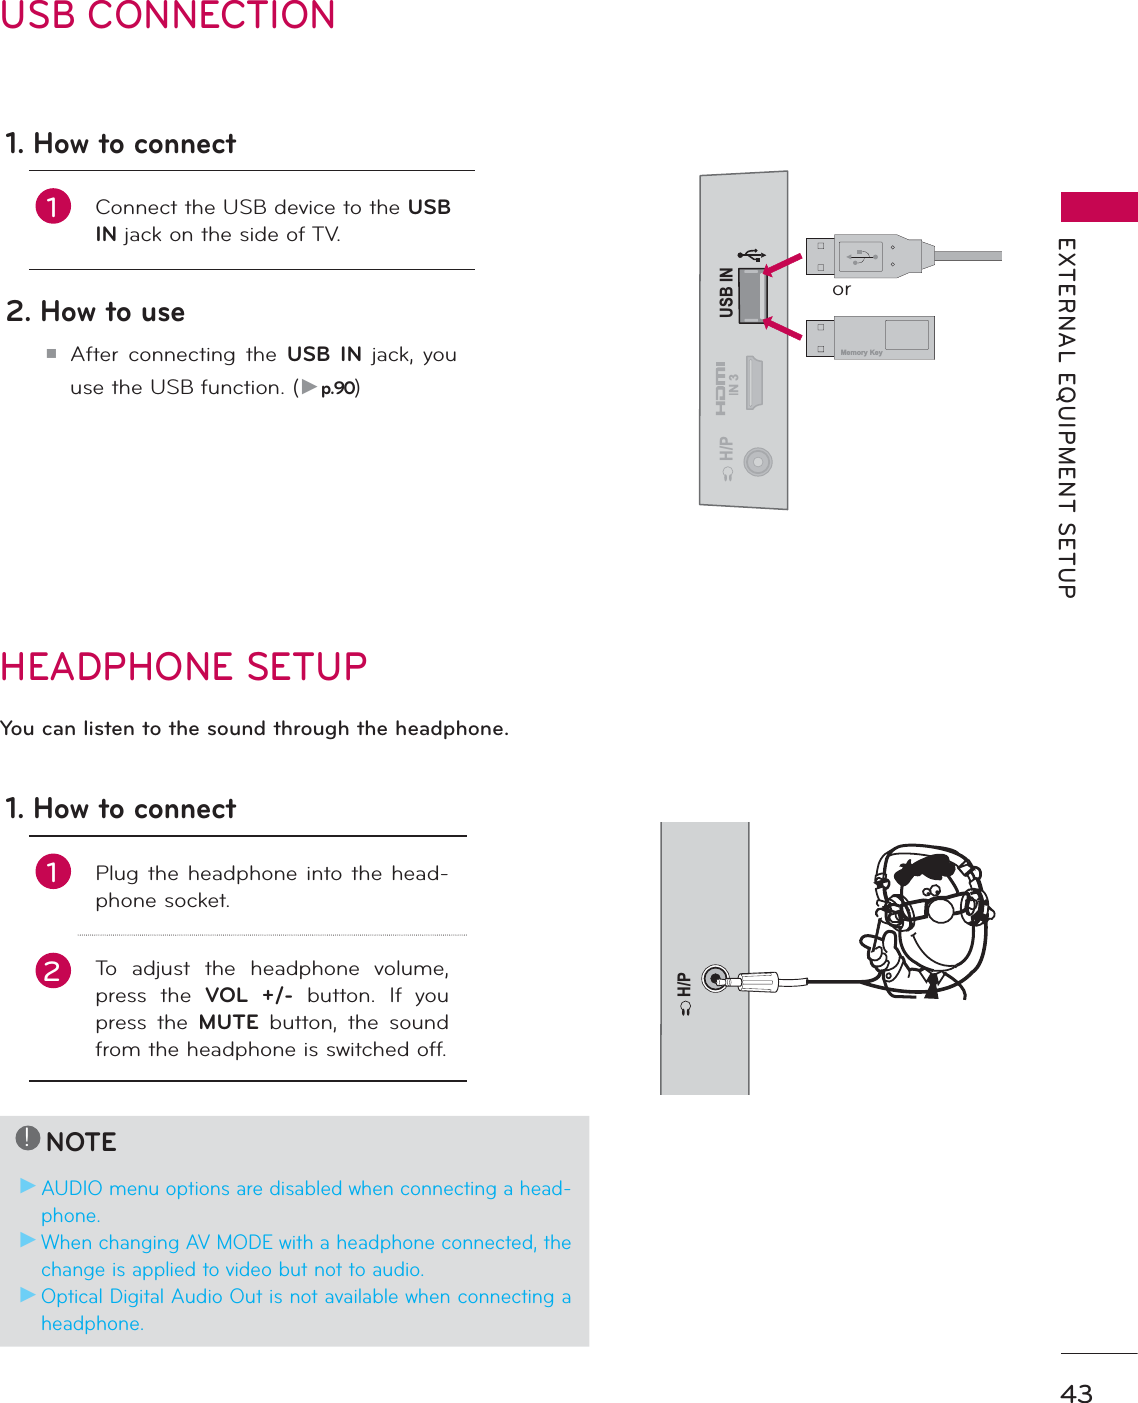 43EXTERNAL EQUIPMENT SETUPUSB CONNECTIONUSB ININ 3H/PMemory Keyor1. How to connect1Connect the USB device to the USBIN jack on the side of TV. 2. How to use᫶After connecting the USB IN jack, you use the USB function. (Źp.90)HEADPHONE SETUP H/PYou can listen to the sound through the headphone.1. How to connect1Plug the headphone into the head-phone socket.2To adjust the headphone volume, press the VOL +/- button. If you press the MUTE button, the sound from the headphone is switched off.!NOTEŹAUDIO menu options are disabled when connecting a head-phone.ŹWhen changing AV MODE with a headphone connected, the change is applied to video but not to audio.ŹOptical Digital Audio Out is not available when connecting a headphone.